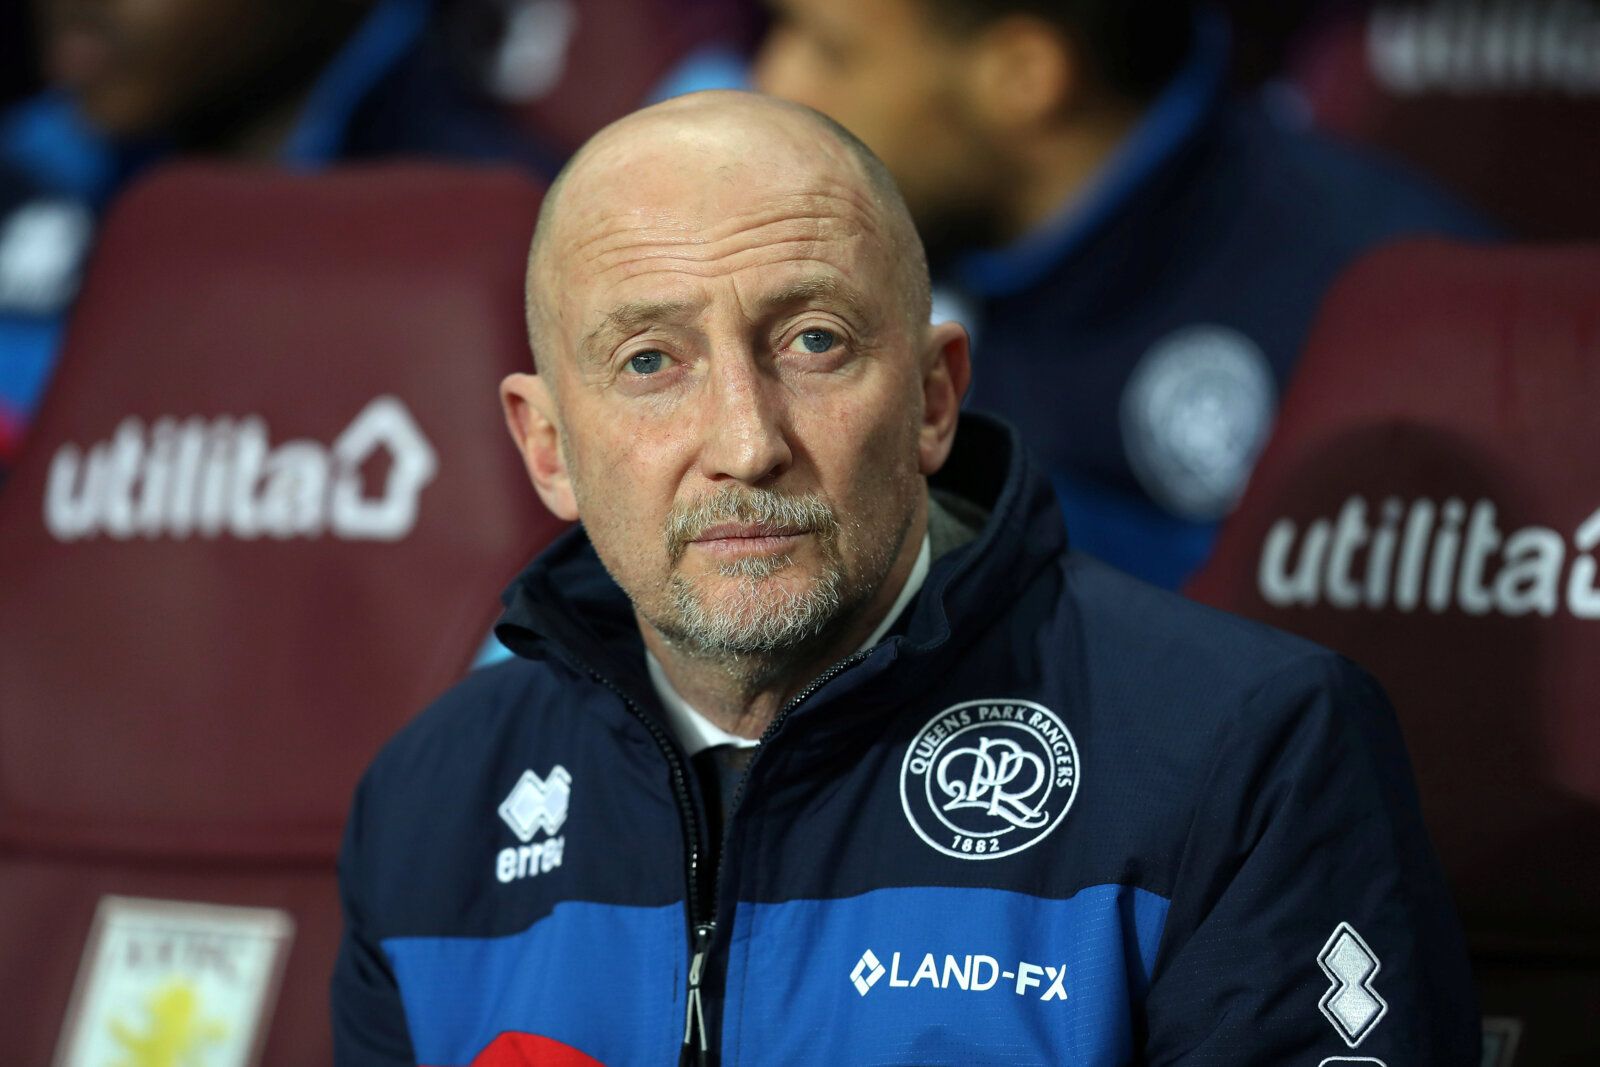 Soccer Football - Championship - Aston Villa vs Queens Park Rangers - Villa Park, Birmingham, Britain - March 13, 2018   Queens Park Rangers' manager Ian Holloway    Action Images/John Clifton    EDITORIAL USE ONLY. No use with unauthorized audio, video, data, fixture lists, club/league logos or 